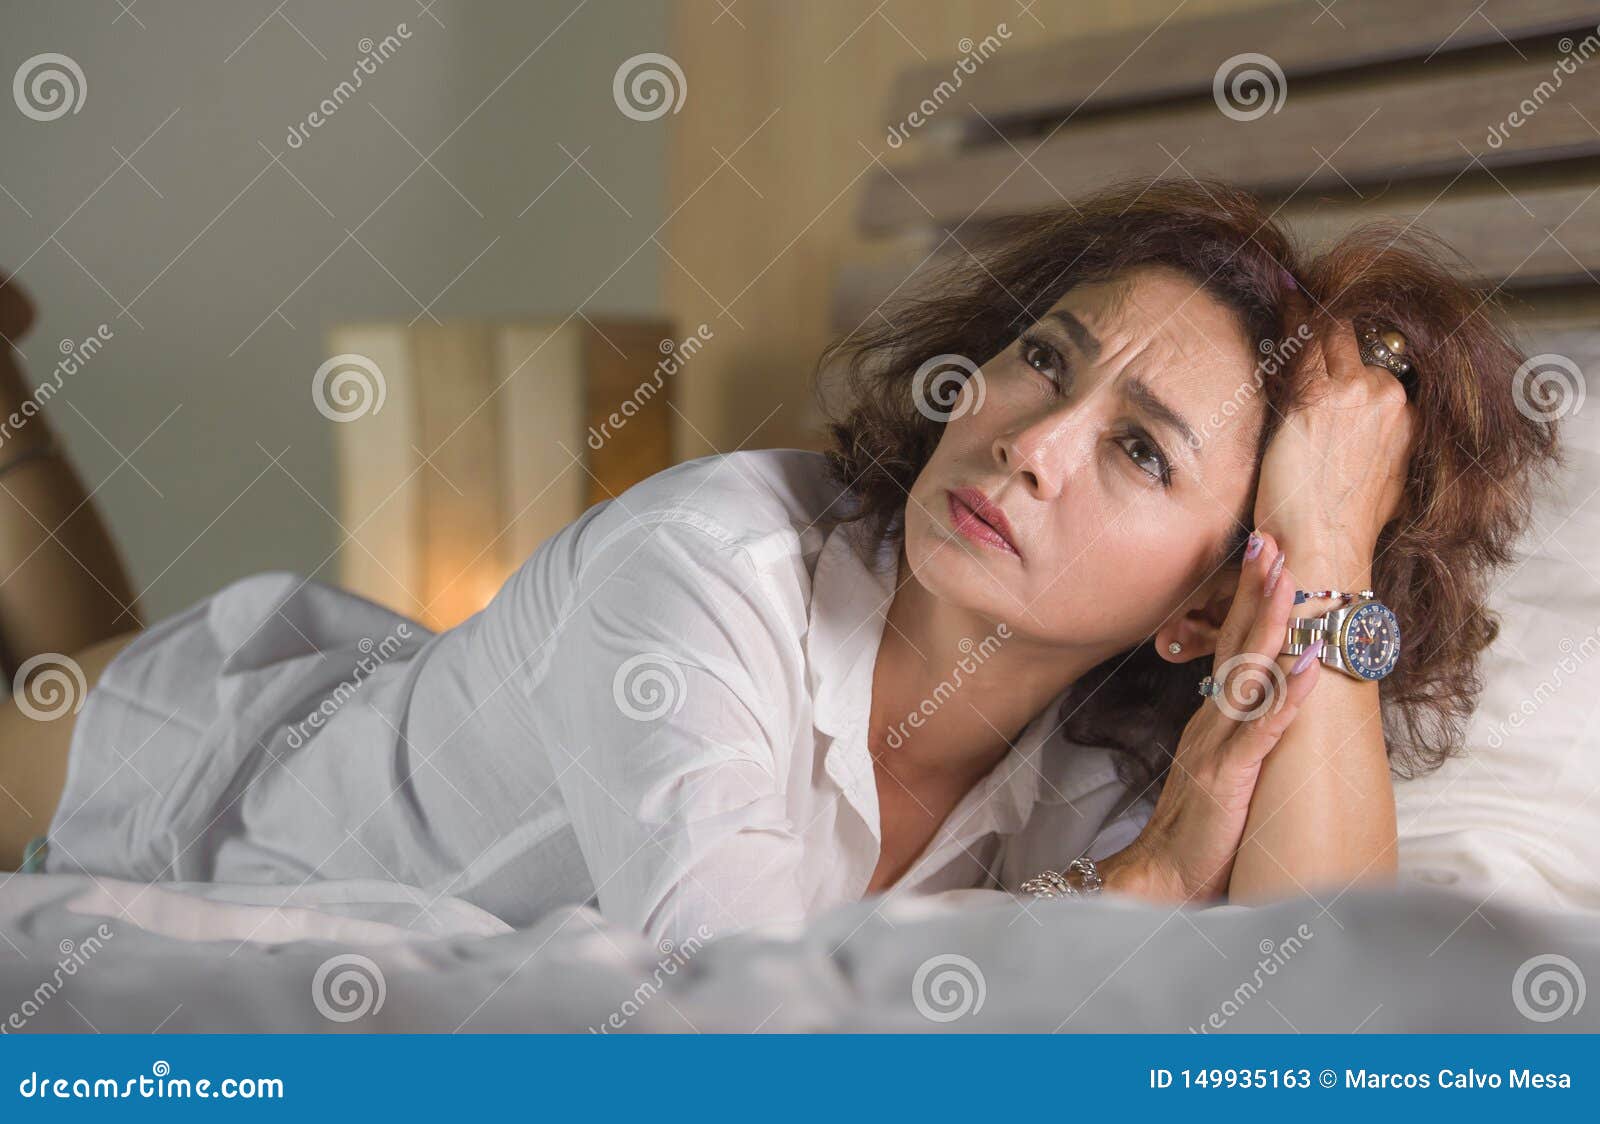 Dramatic Lifestyle Portrait Of Attractive Sad And Depressed Middle Aged Around 50s Woman Feeling 